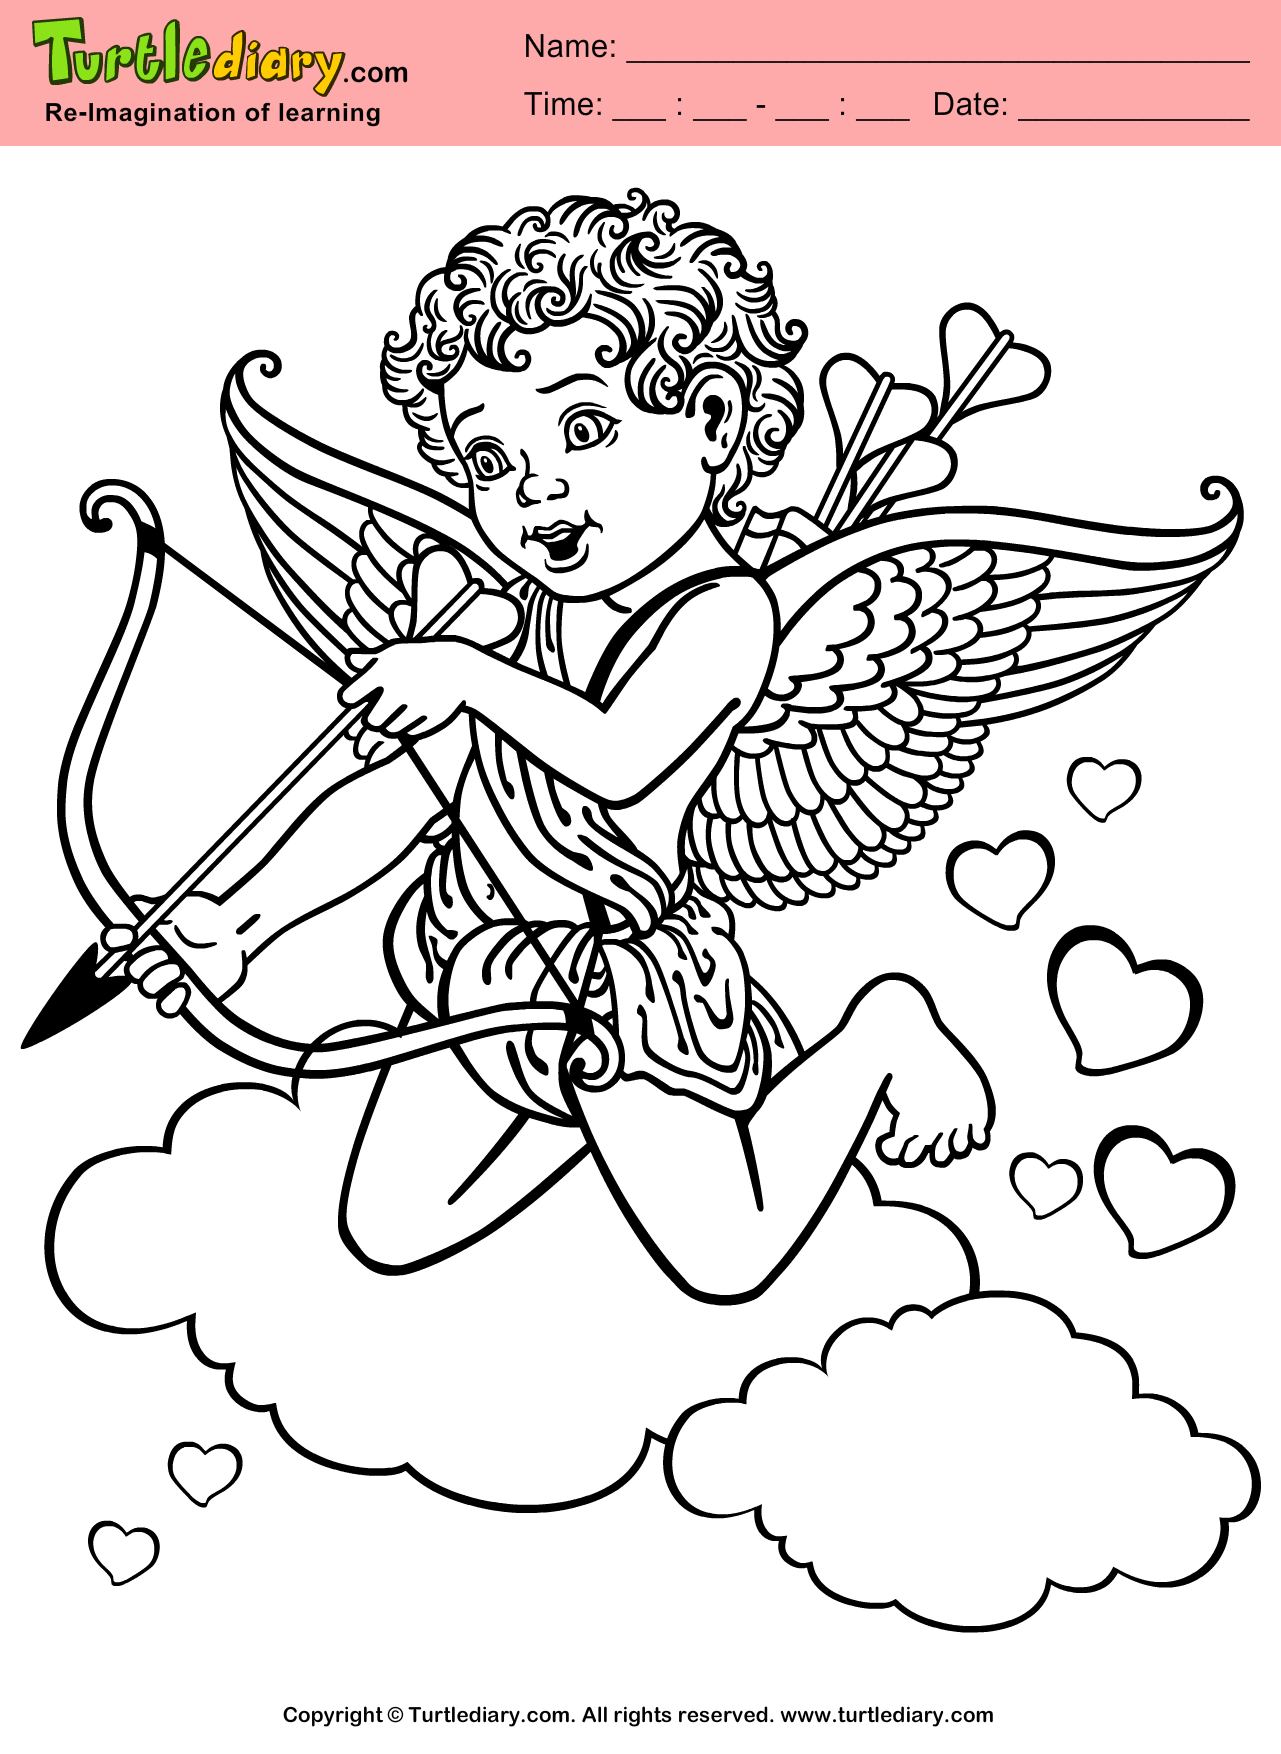 Cupid coloring sheet turtle diary